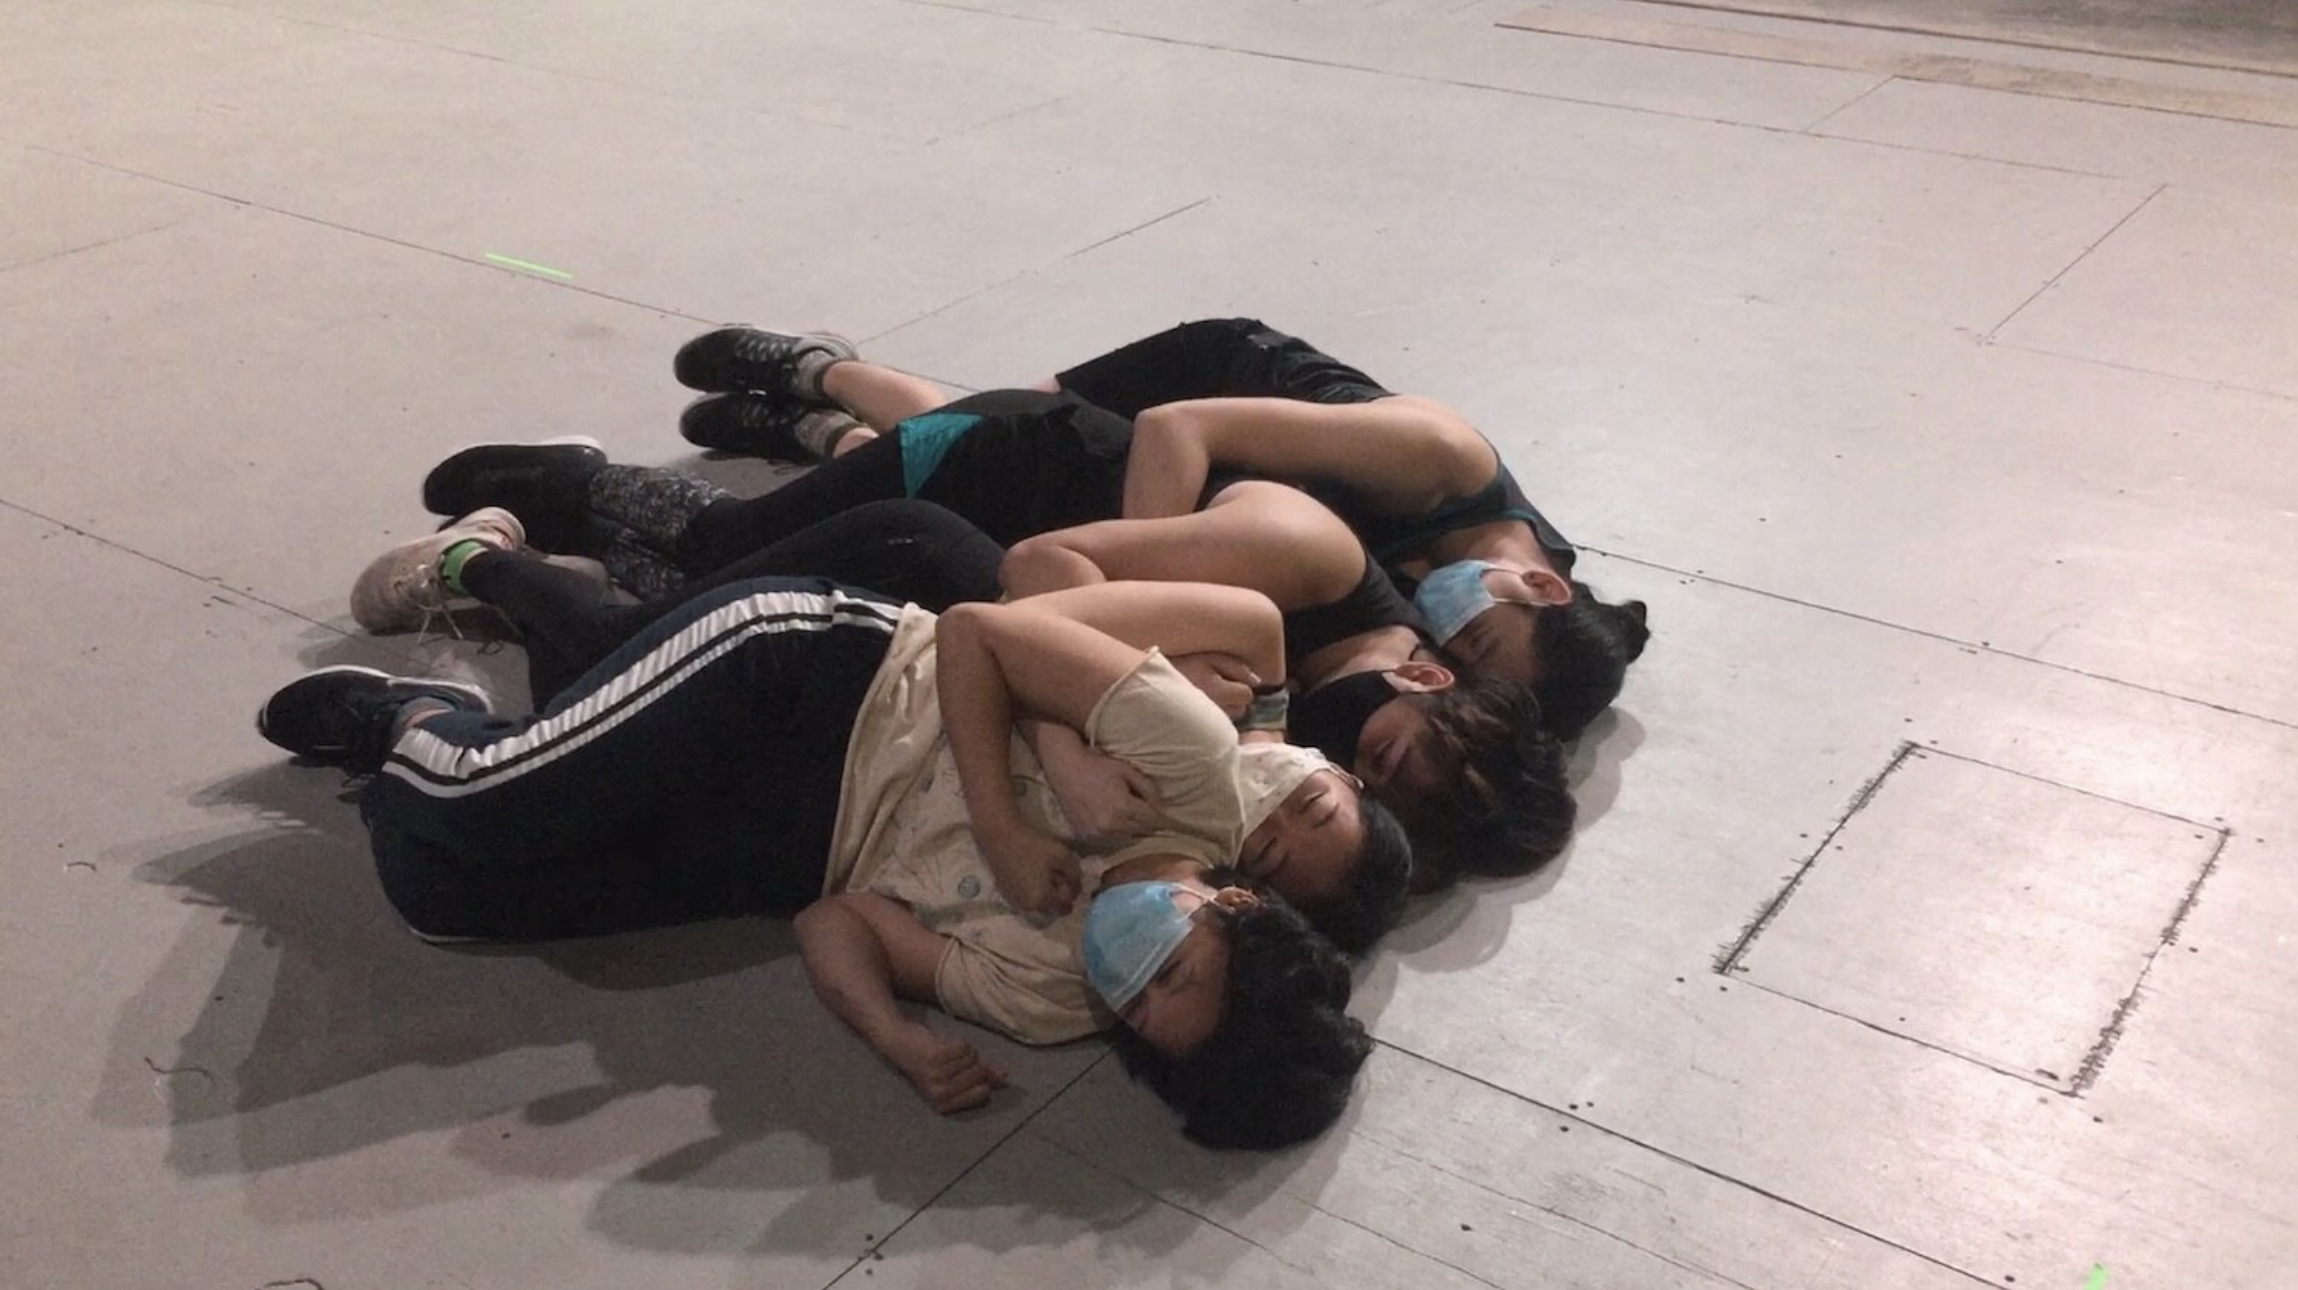 Martin Borromeo, Alyssa Forte, James Lim, Paulina Meneses, and Resa Mishina in Kenneth Tam, The Crossing, 2020. Rehearsal views at Queenslab. Photographs by Kenneth Tam and Lumi Tan.